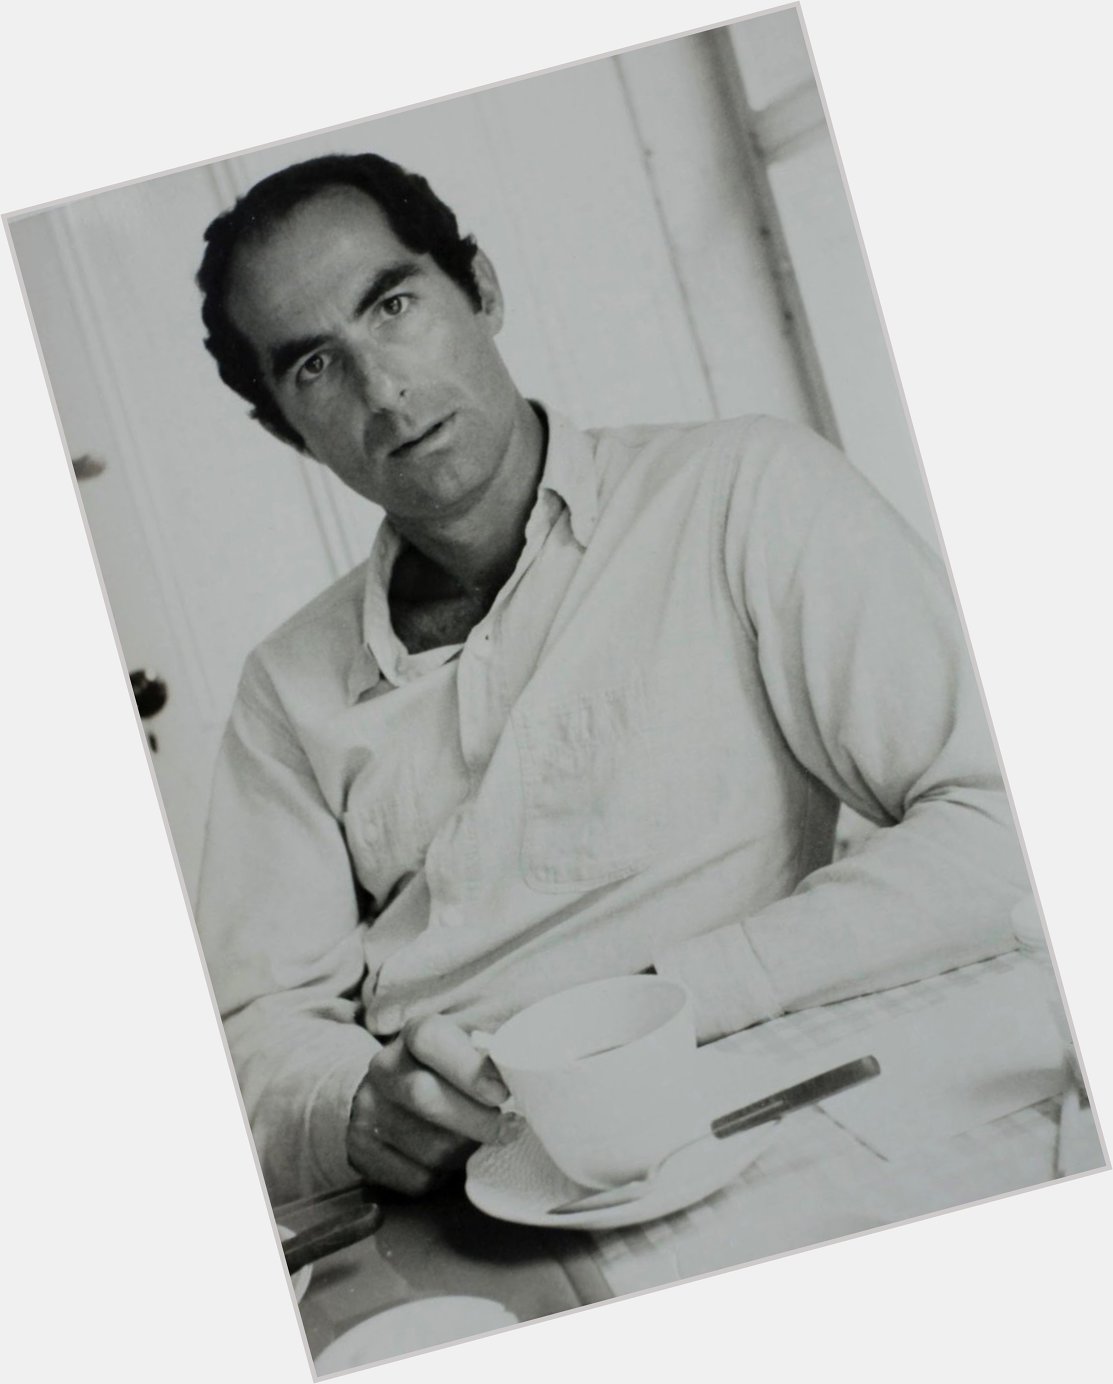 Happy Birthday Philip Roth. May the Nobel committee get their act together this year.  